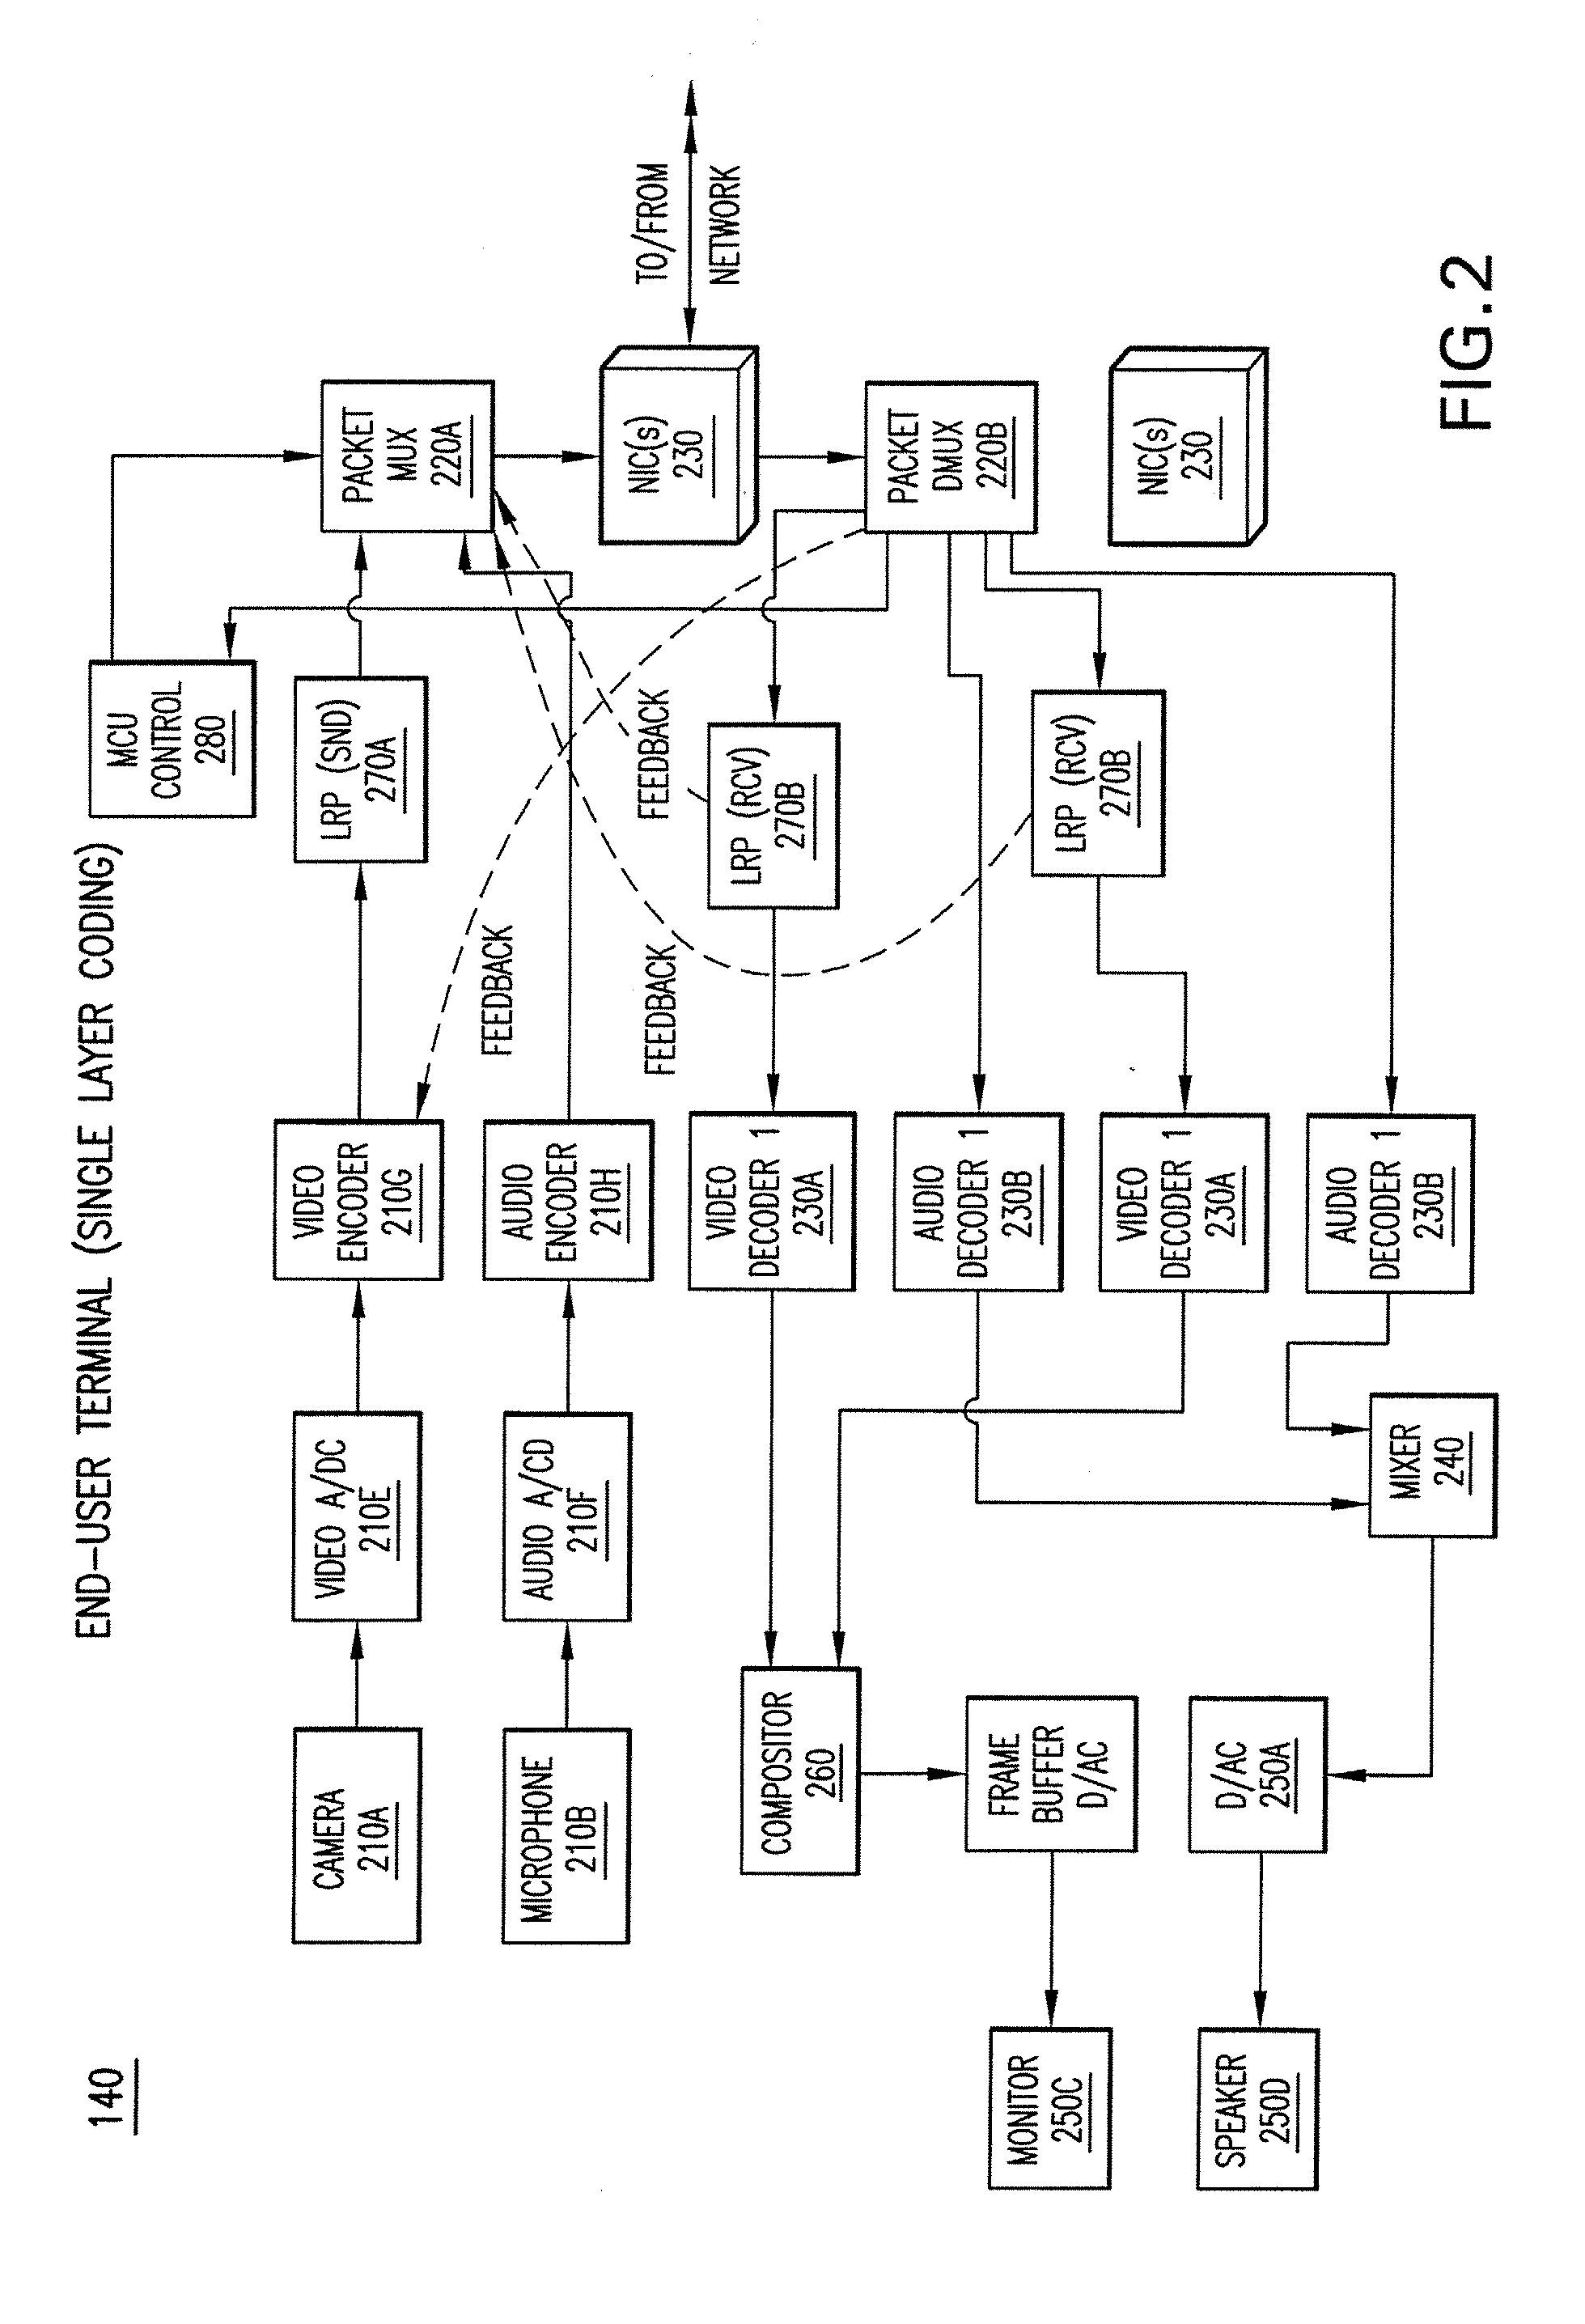 Systems and methods for error resilience in video communication systems